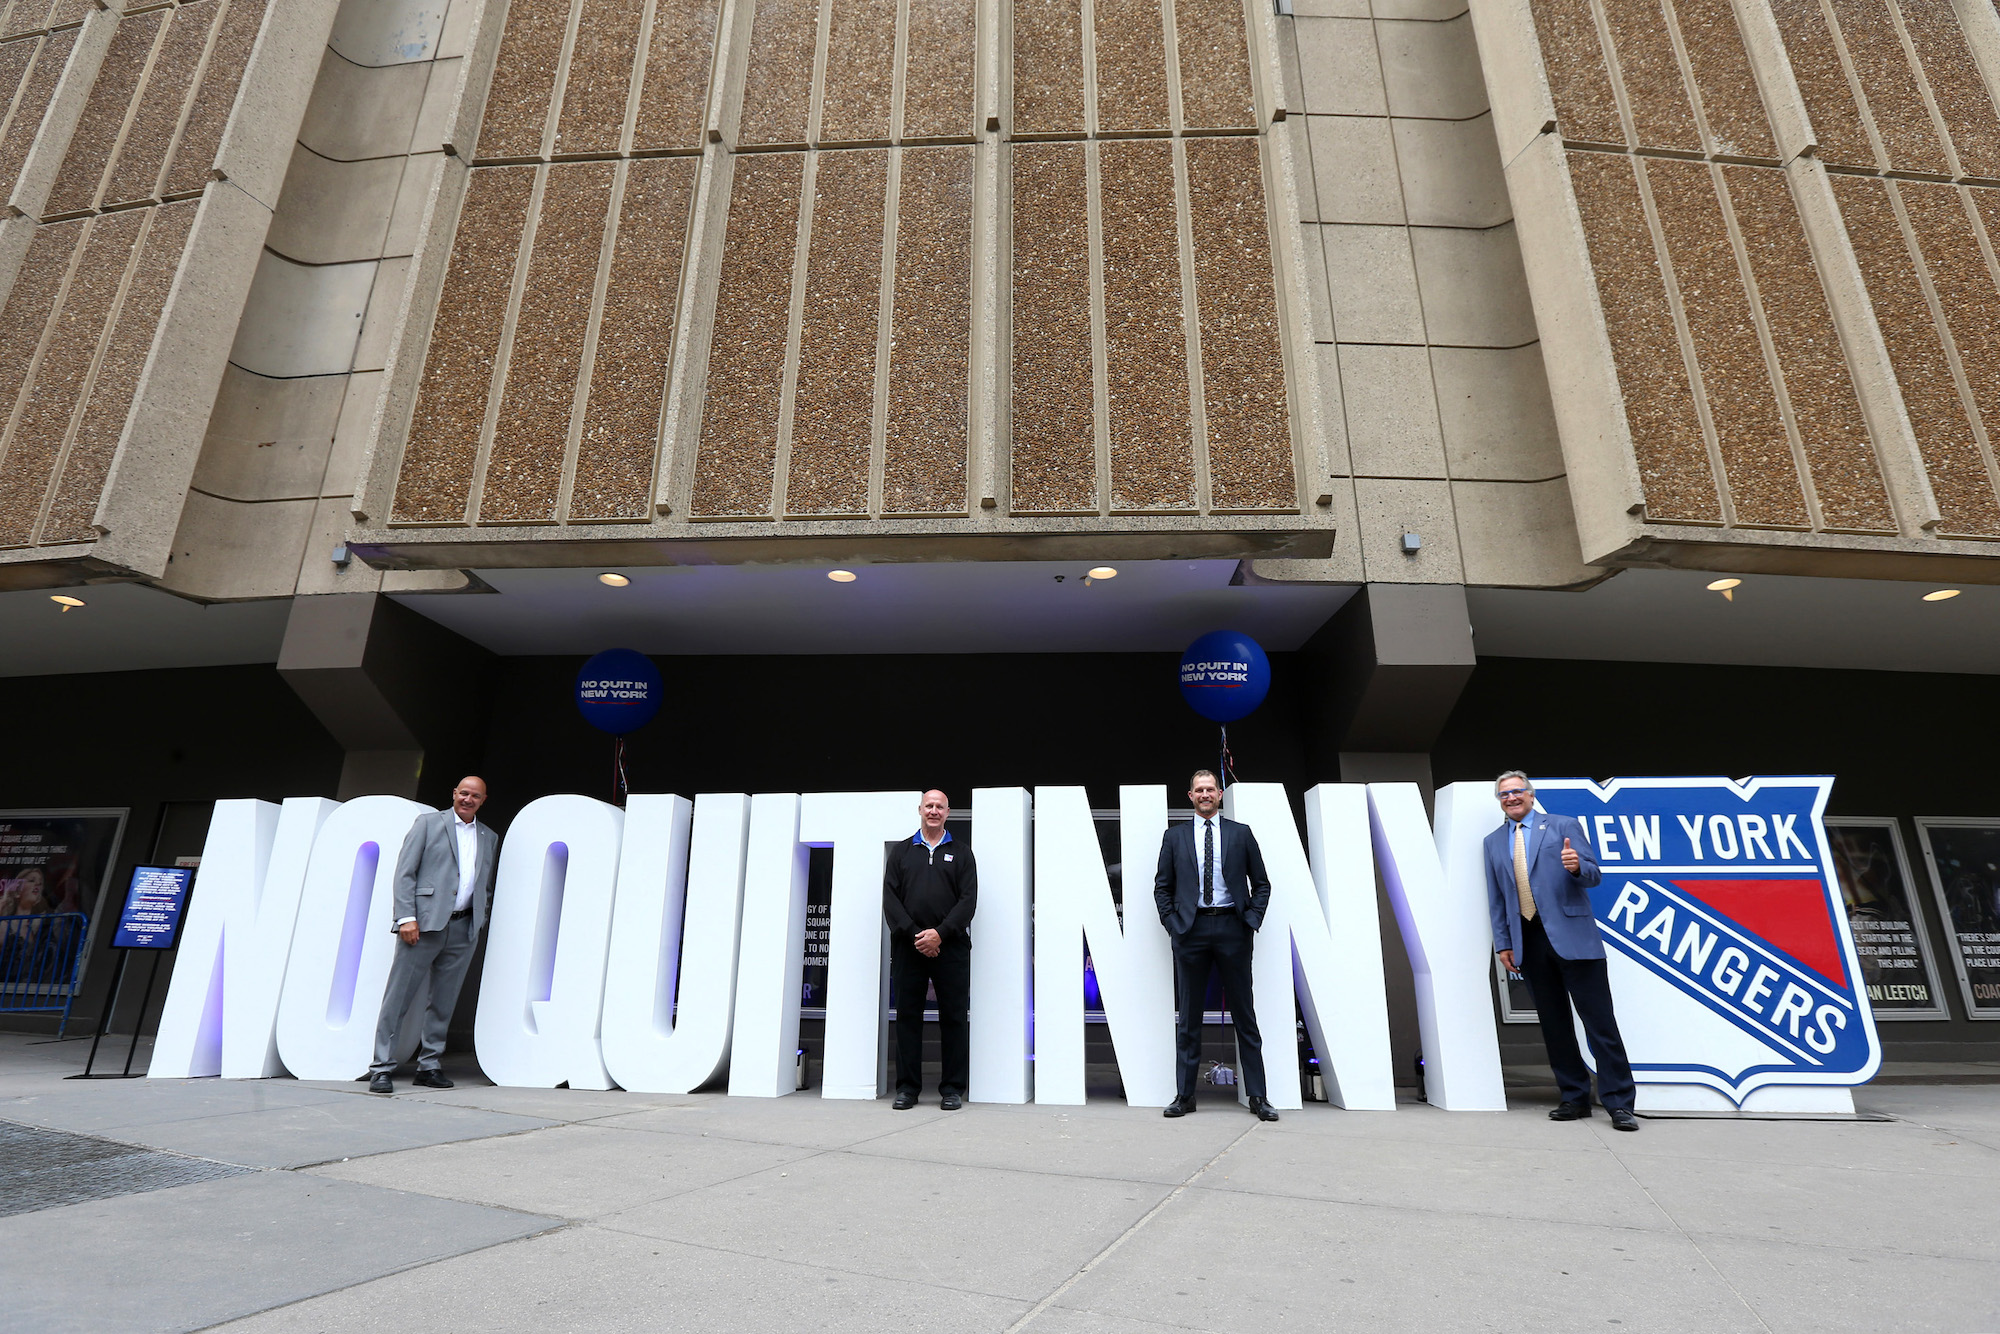 Giant 'No Quit In New York' letters pop up across NYC to show support for  Rangers playoff run